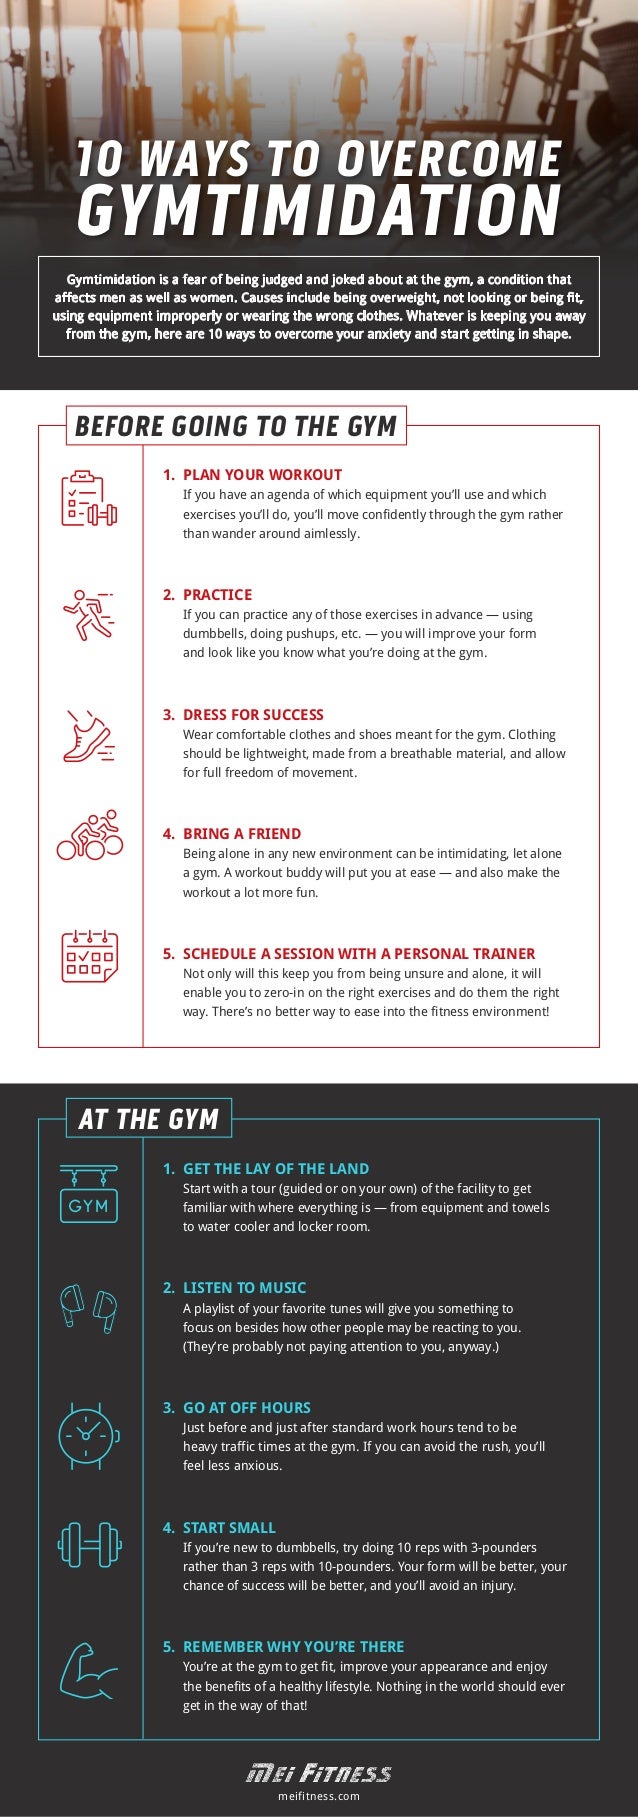 ways to overcome gymtimidation